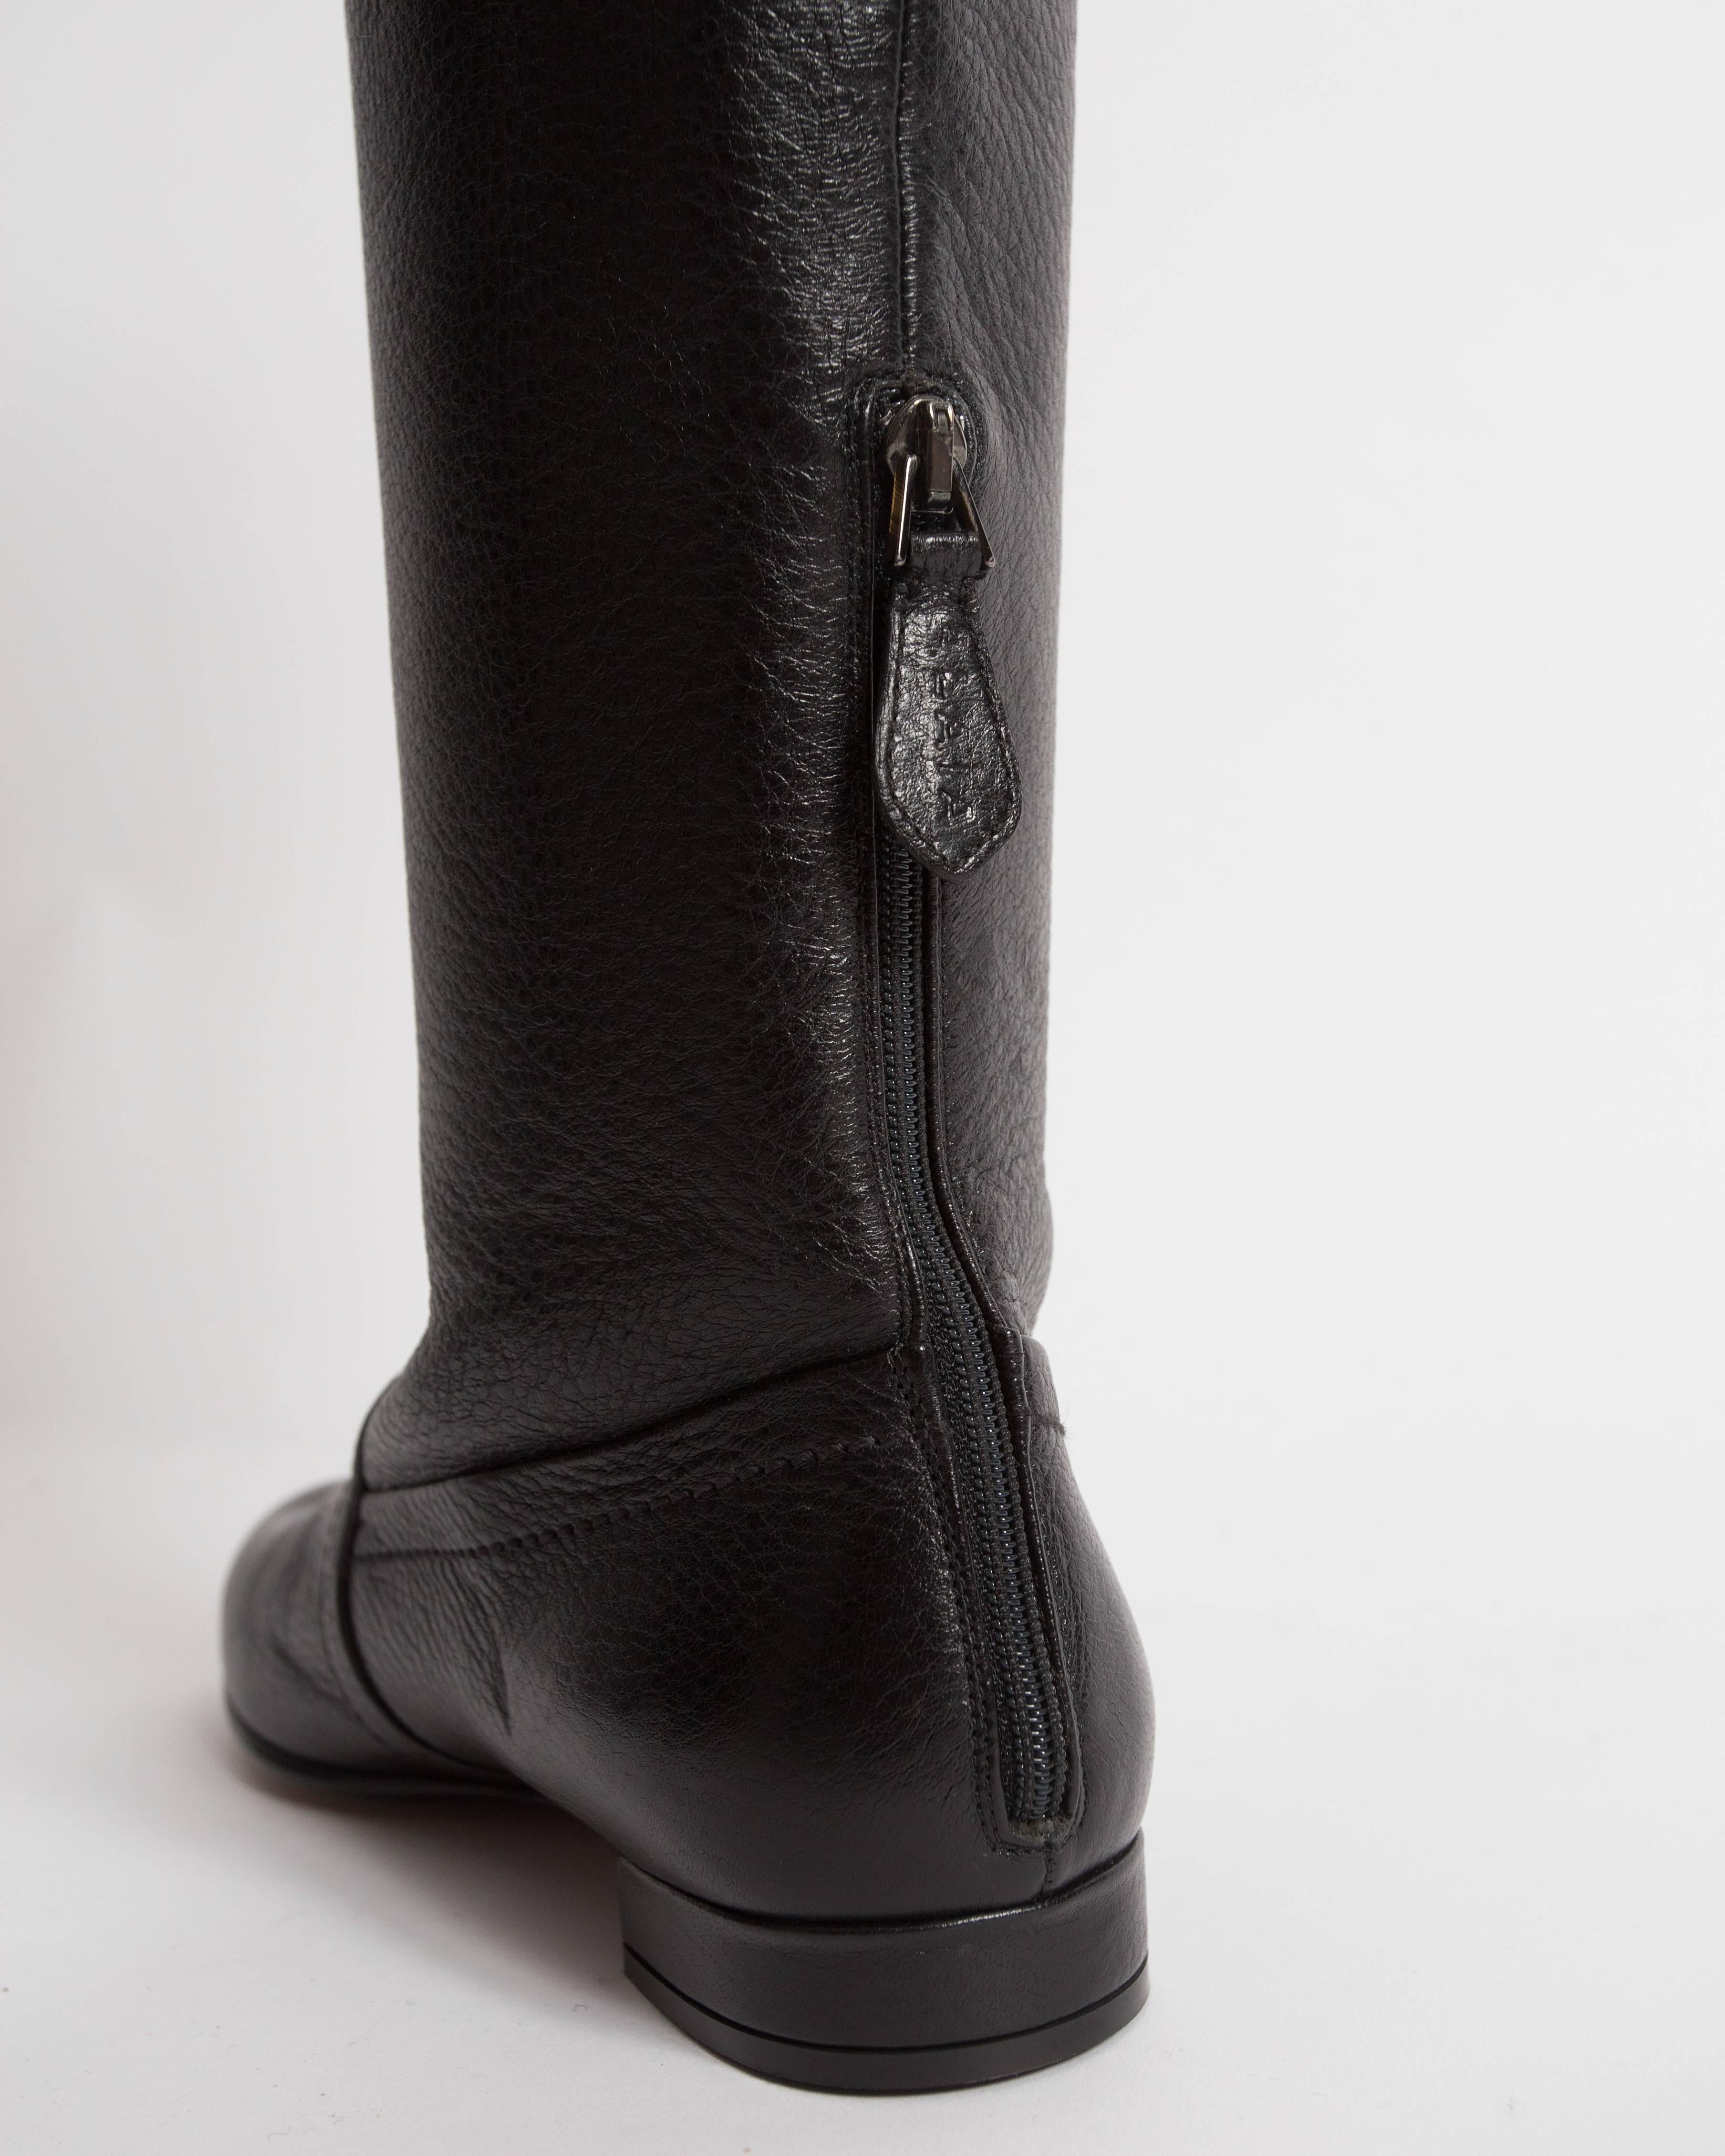 Alaia black leather riding boots, size 37.5 2